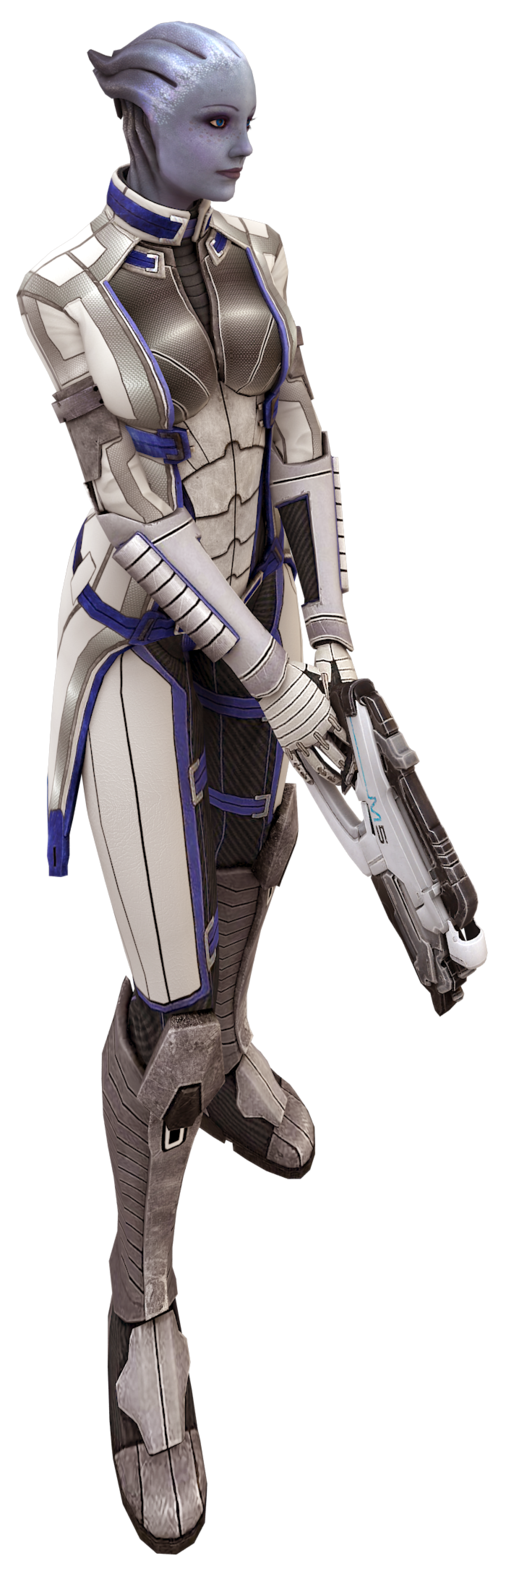 Mass Effect 2 PNG Image